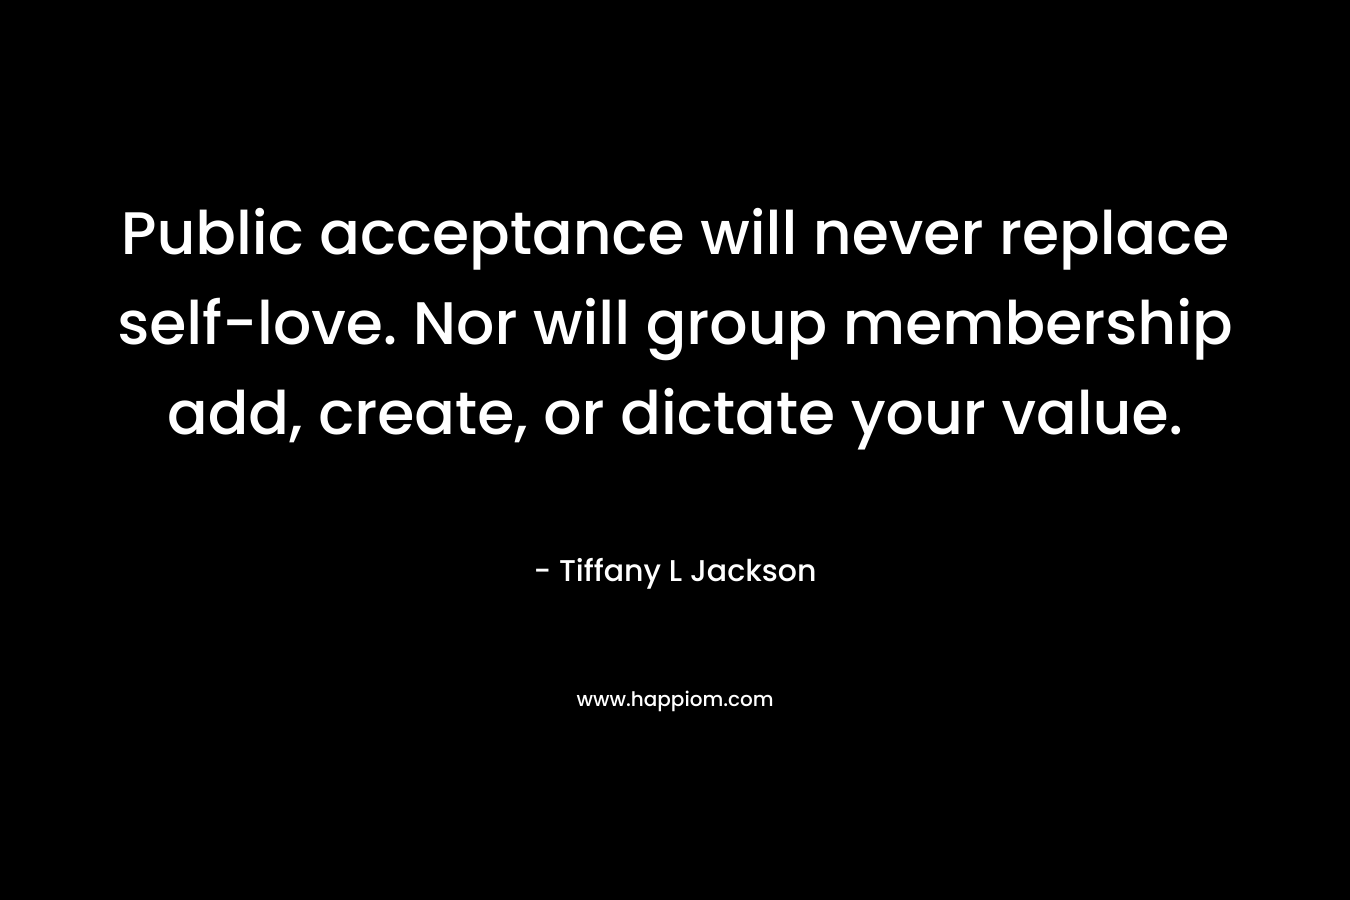 Public acceptance will never replace self-love. Nor will group membership add, create, or dictate your value.